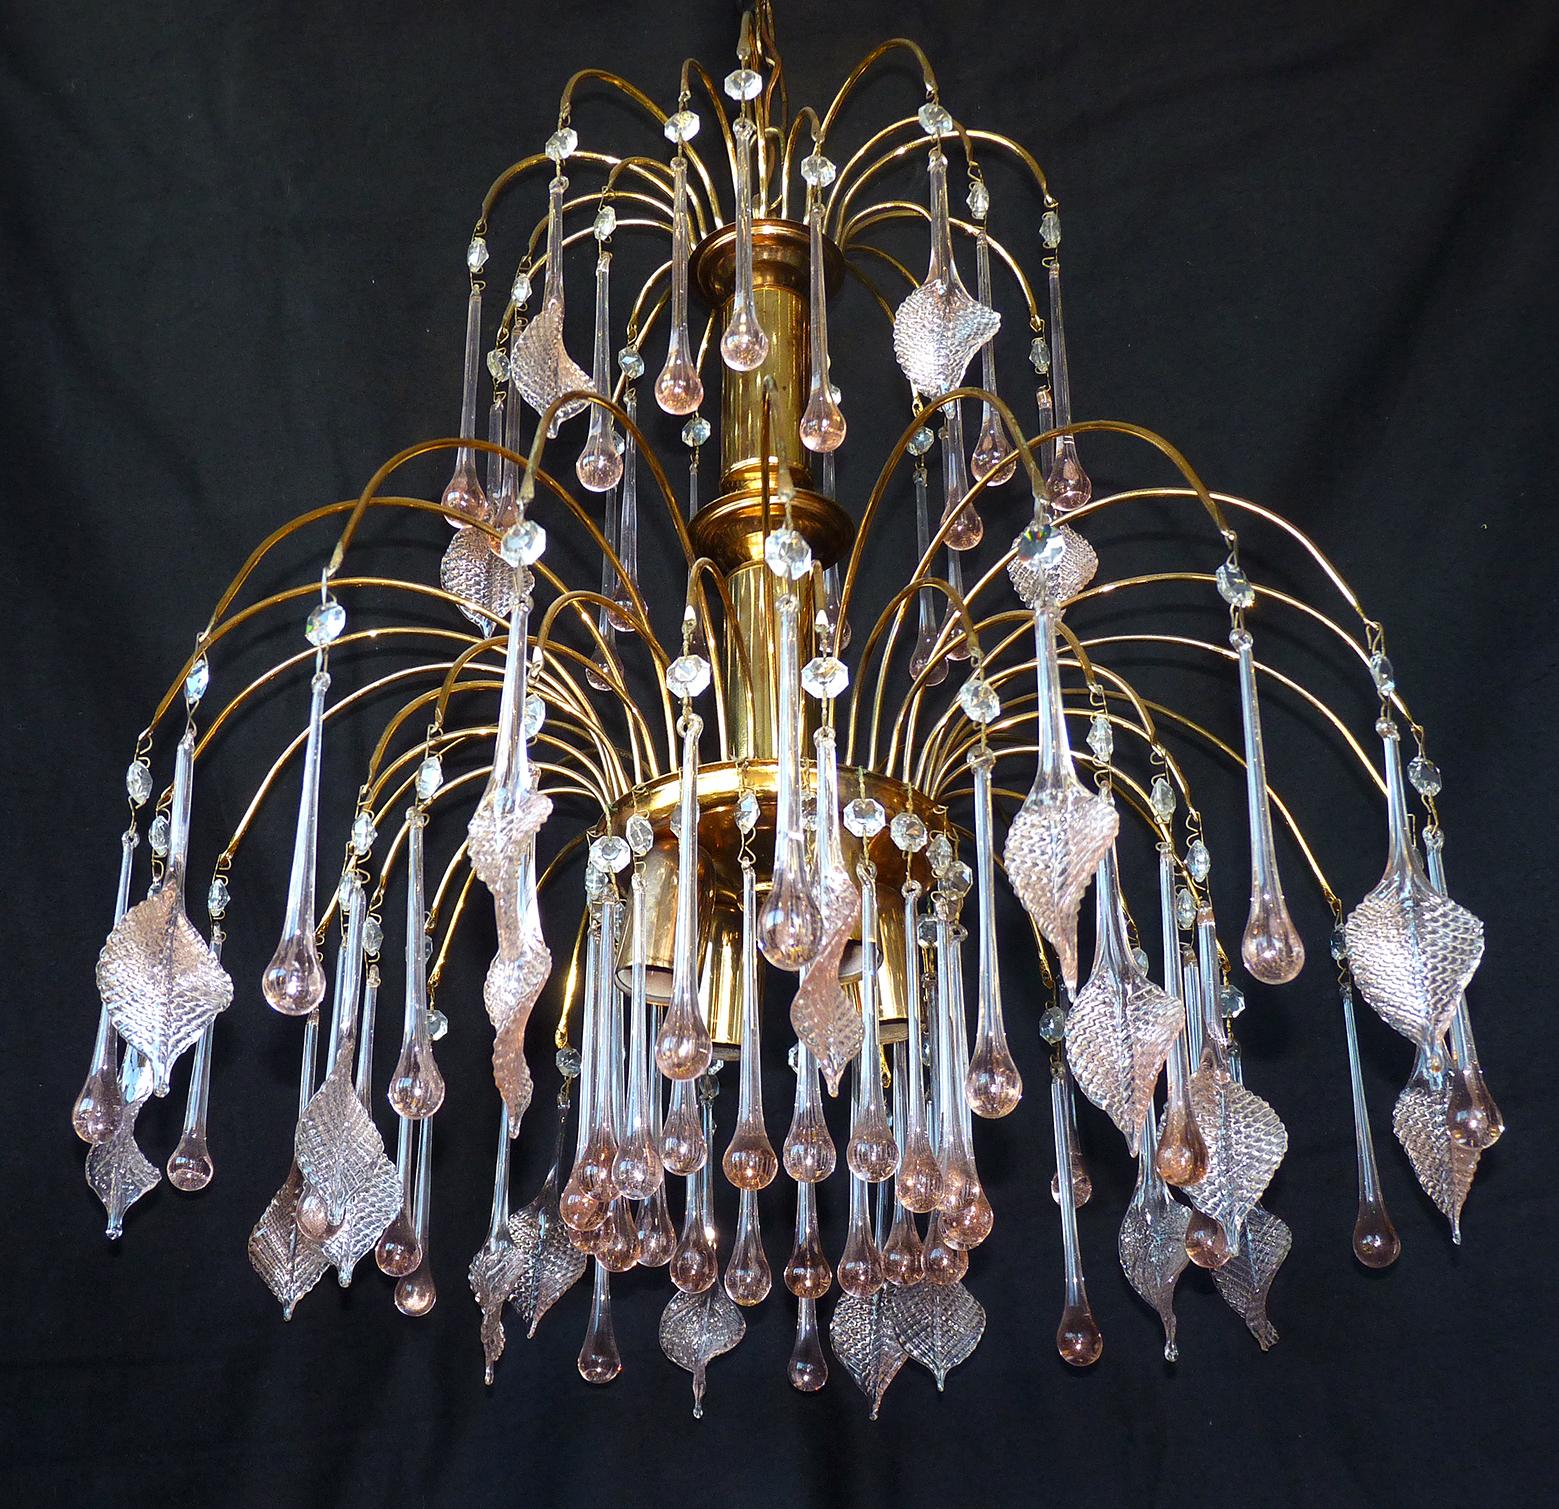 Rare gorgeous midcentury Italian Murano chandelier in the style of Venini.
Pink fogged crystal teardrops, pink glass flowers and gilt flowers waterfall 3 tiers wedding cake 
Measures:
Diameter: 20 in/ 50 cm
Height: 40 in (11.8 in/chain)/ 100 cm (30